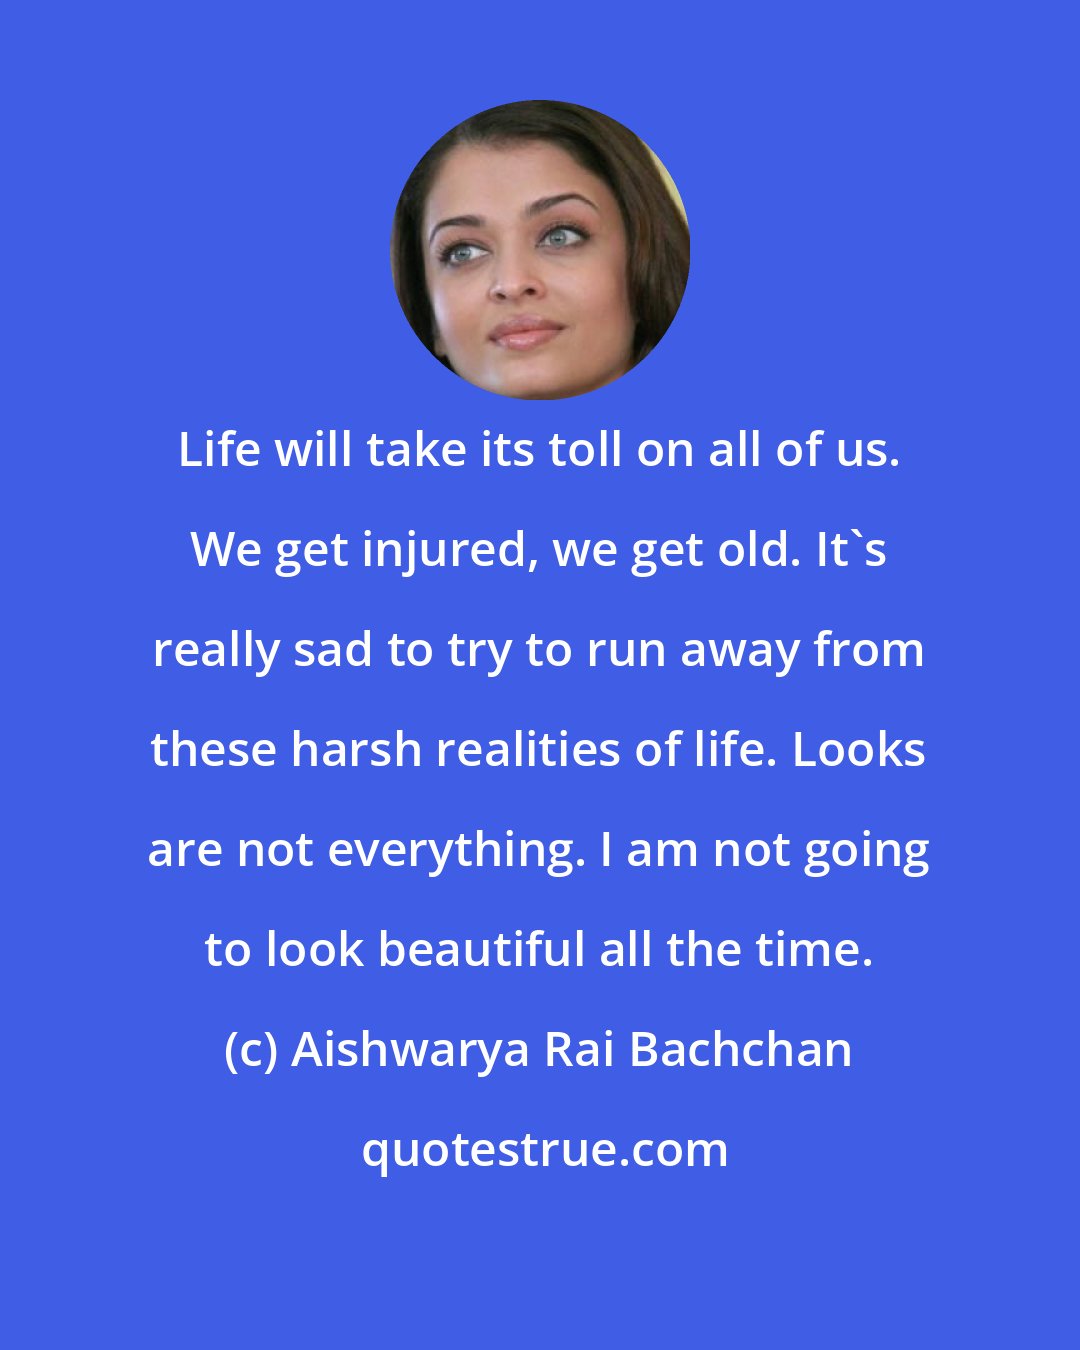 Aishwarya Rai Bachchan: Life will take its toll on all of us. We get injured, we get old. It's really sad to try to run away from these harsh realities of life. Looks are not everything. I am not going to look beautiful all the time.